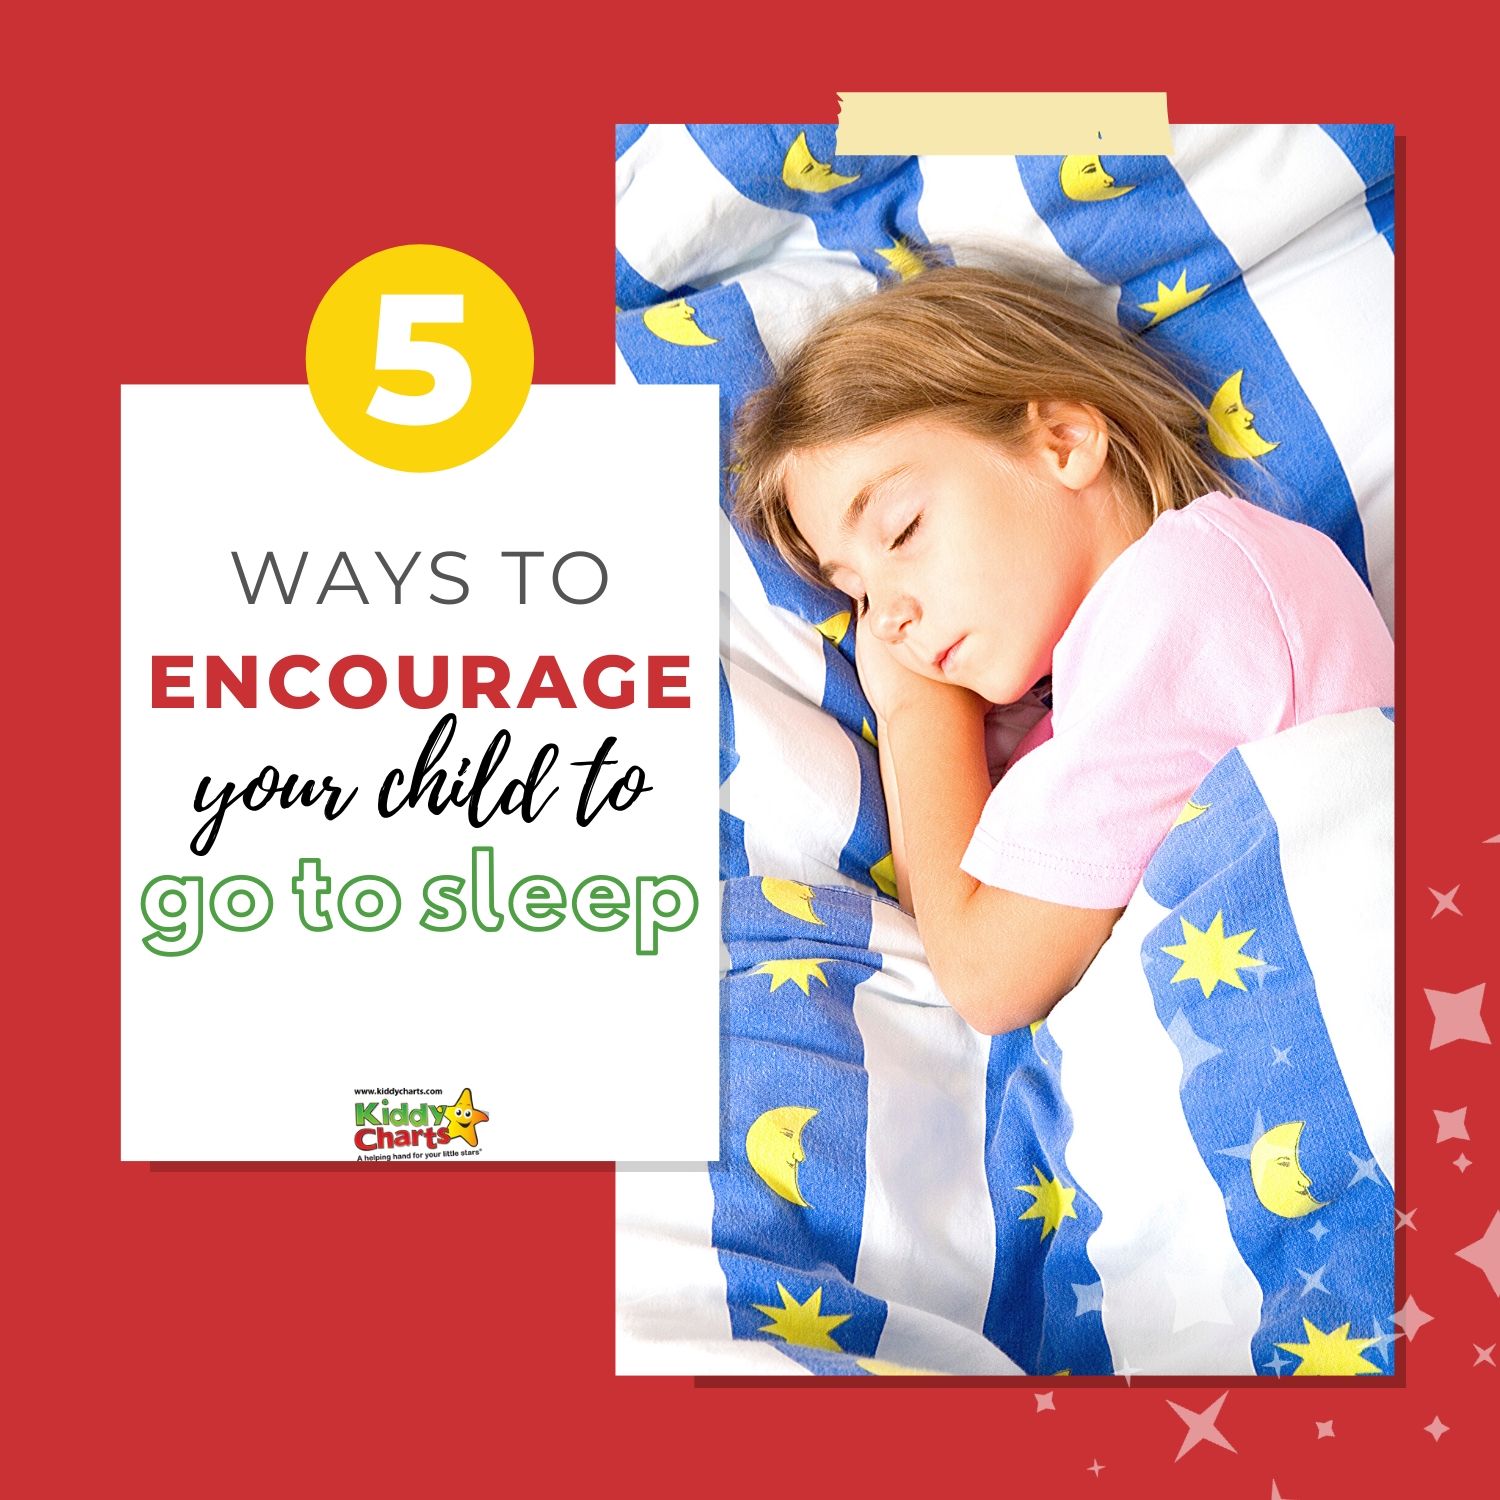 One thing that almost every parent has to deal is the struggle to get kids to sleep. Here are 5 ways to encourage your child to go to sleep.